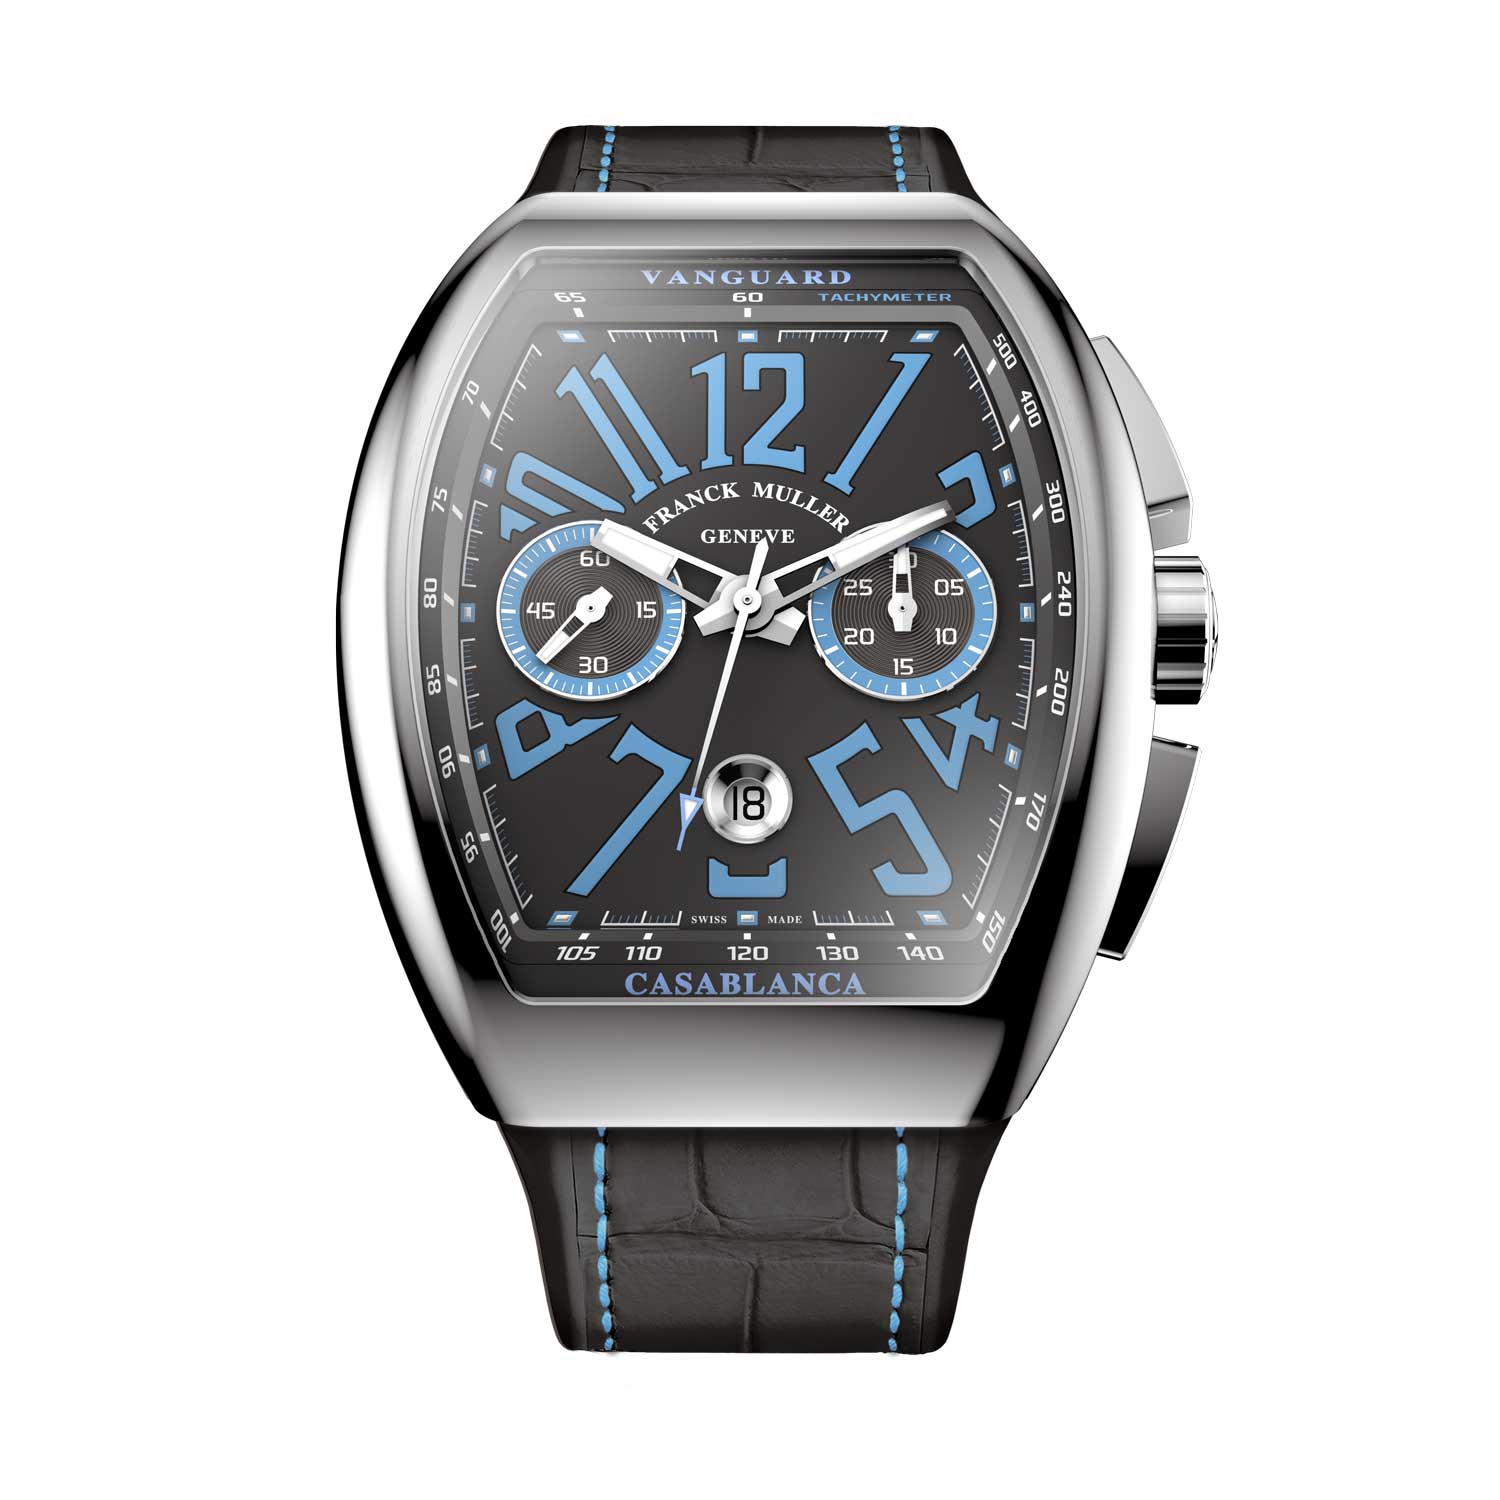 Franck Muller Vanguard Casablanca Chronograph sporting a black dial with blue accents